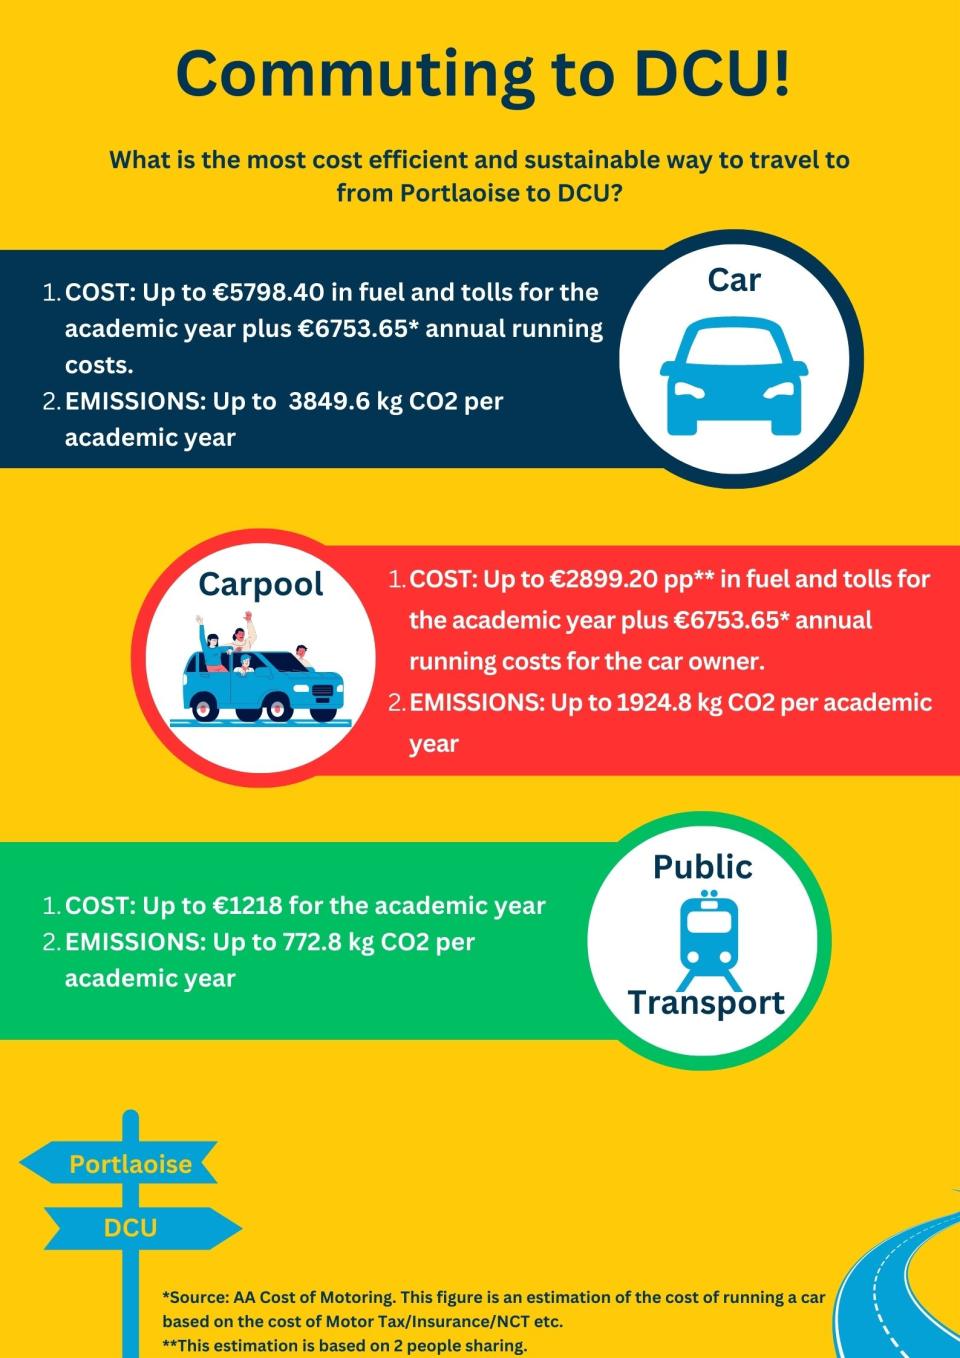 Comparison of cost and emissions associated with travelling to DCU throughout academic year via different transport modes. Car - €5798.40 in fuel and tolls, 3849.6kg CO2 in emissions. Carpool - €2899.20 per person in fuel and tolls, 1924.8kg CO2 in emissions.  Public Transport - €1218 in fares, 772.8kg CO2 in emissions.